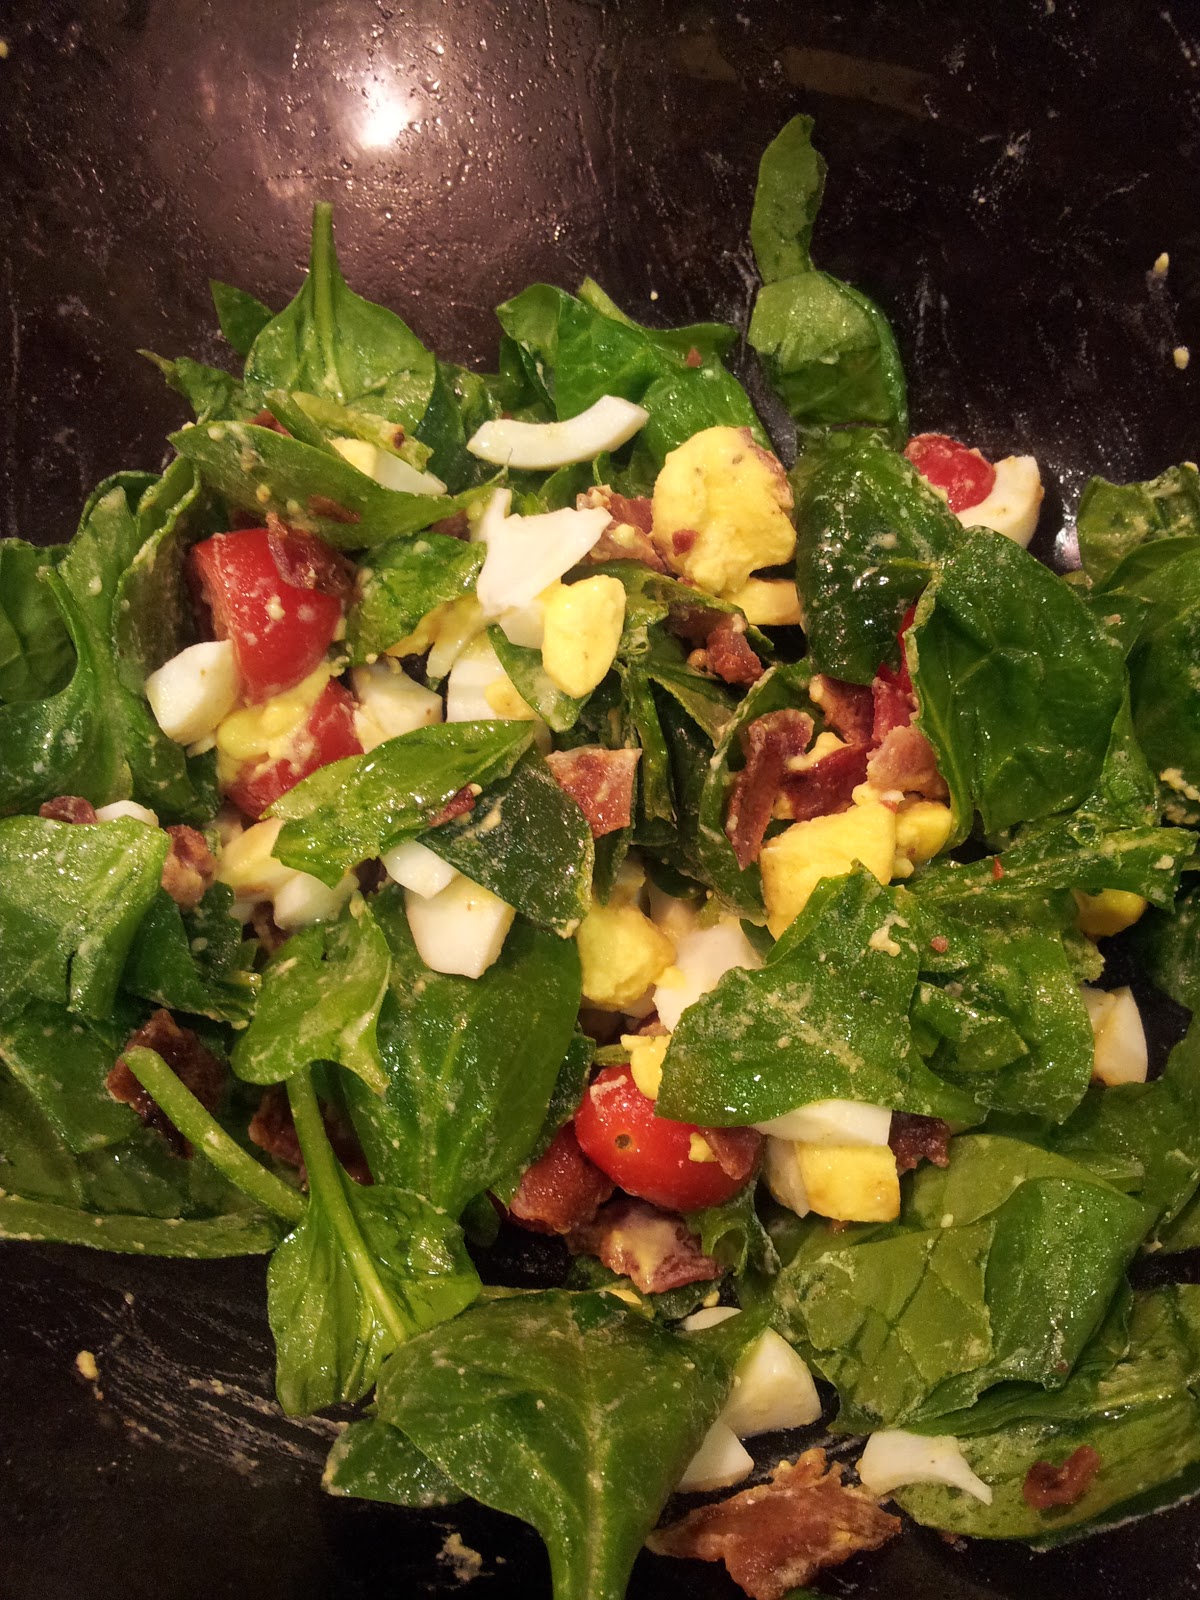 Adventures in Cooking: Easy Spinach Salad